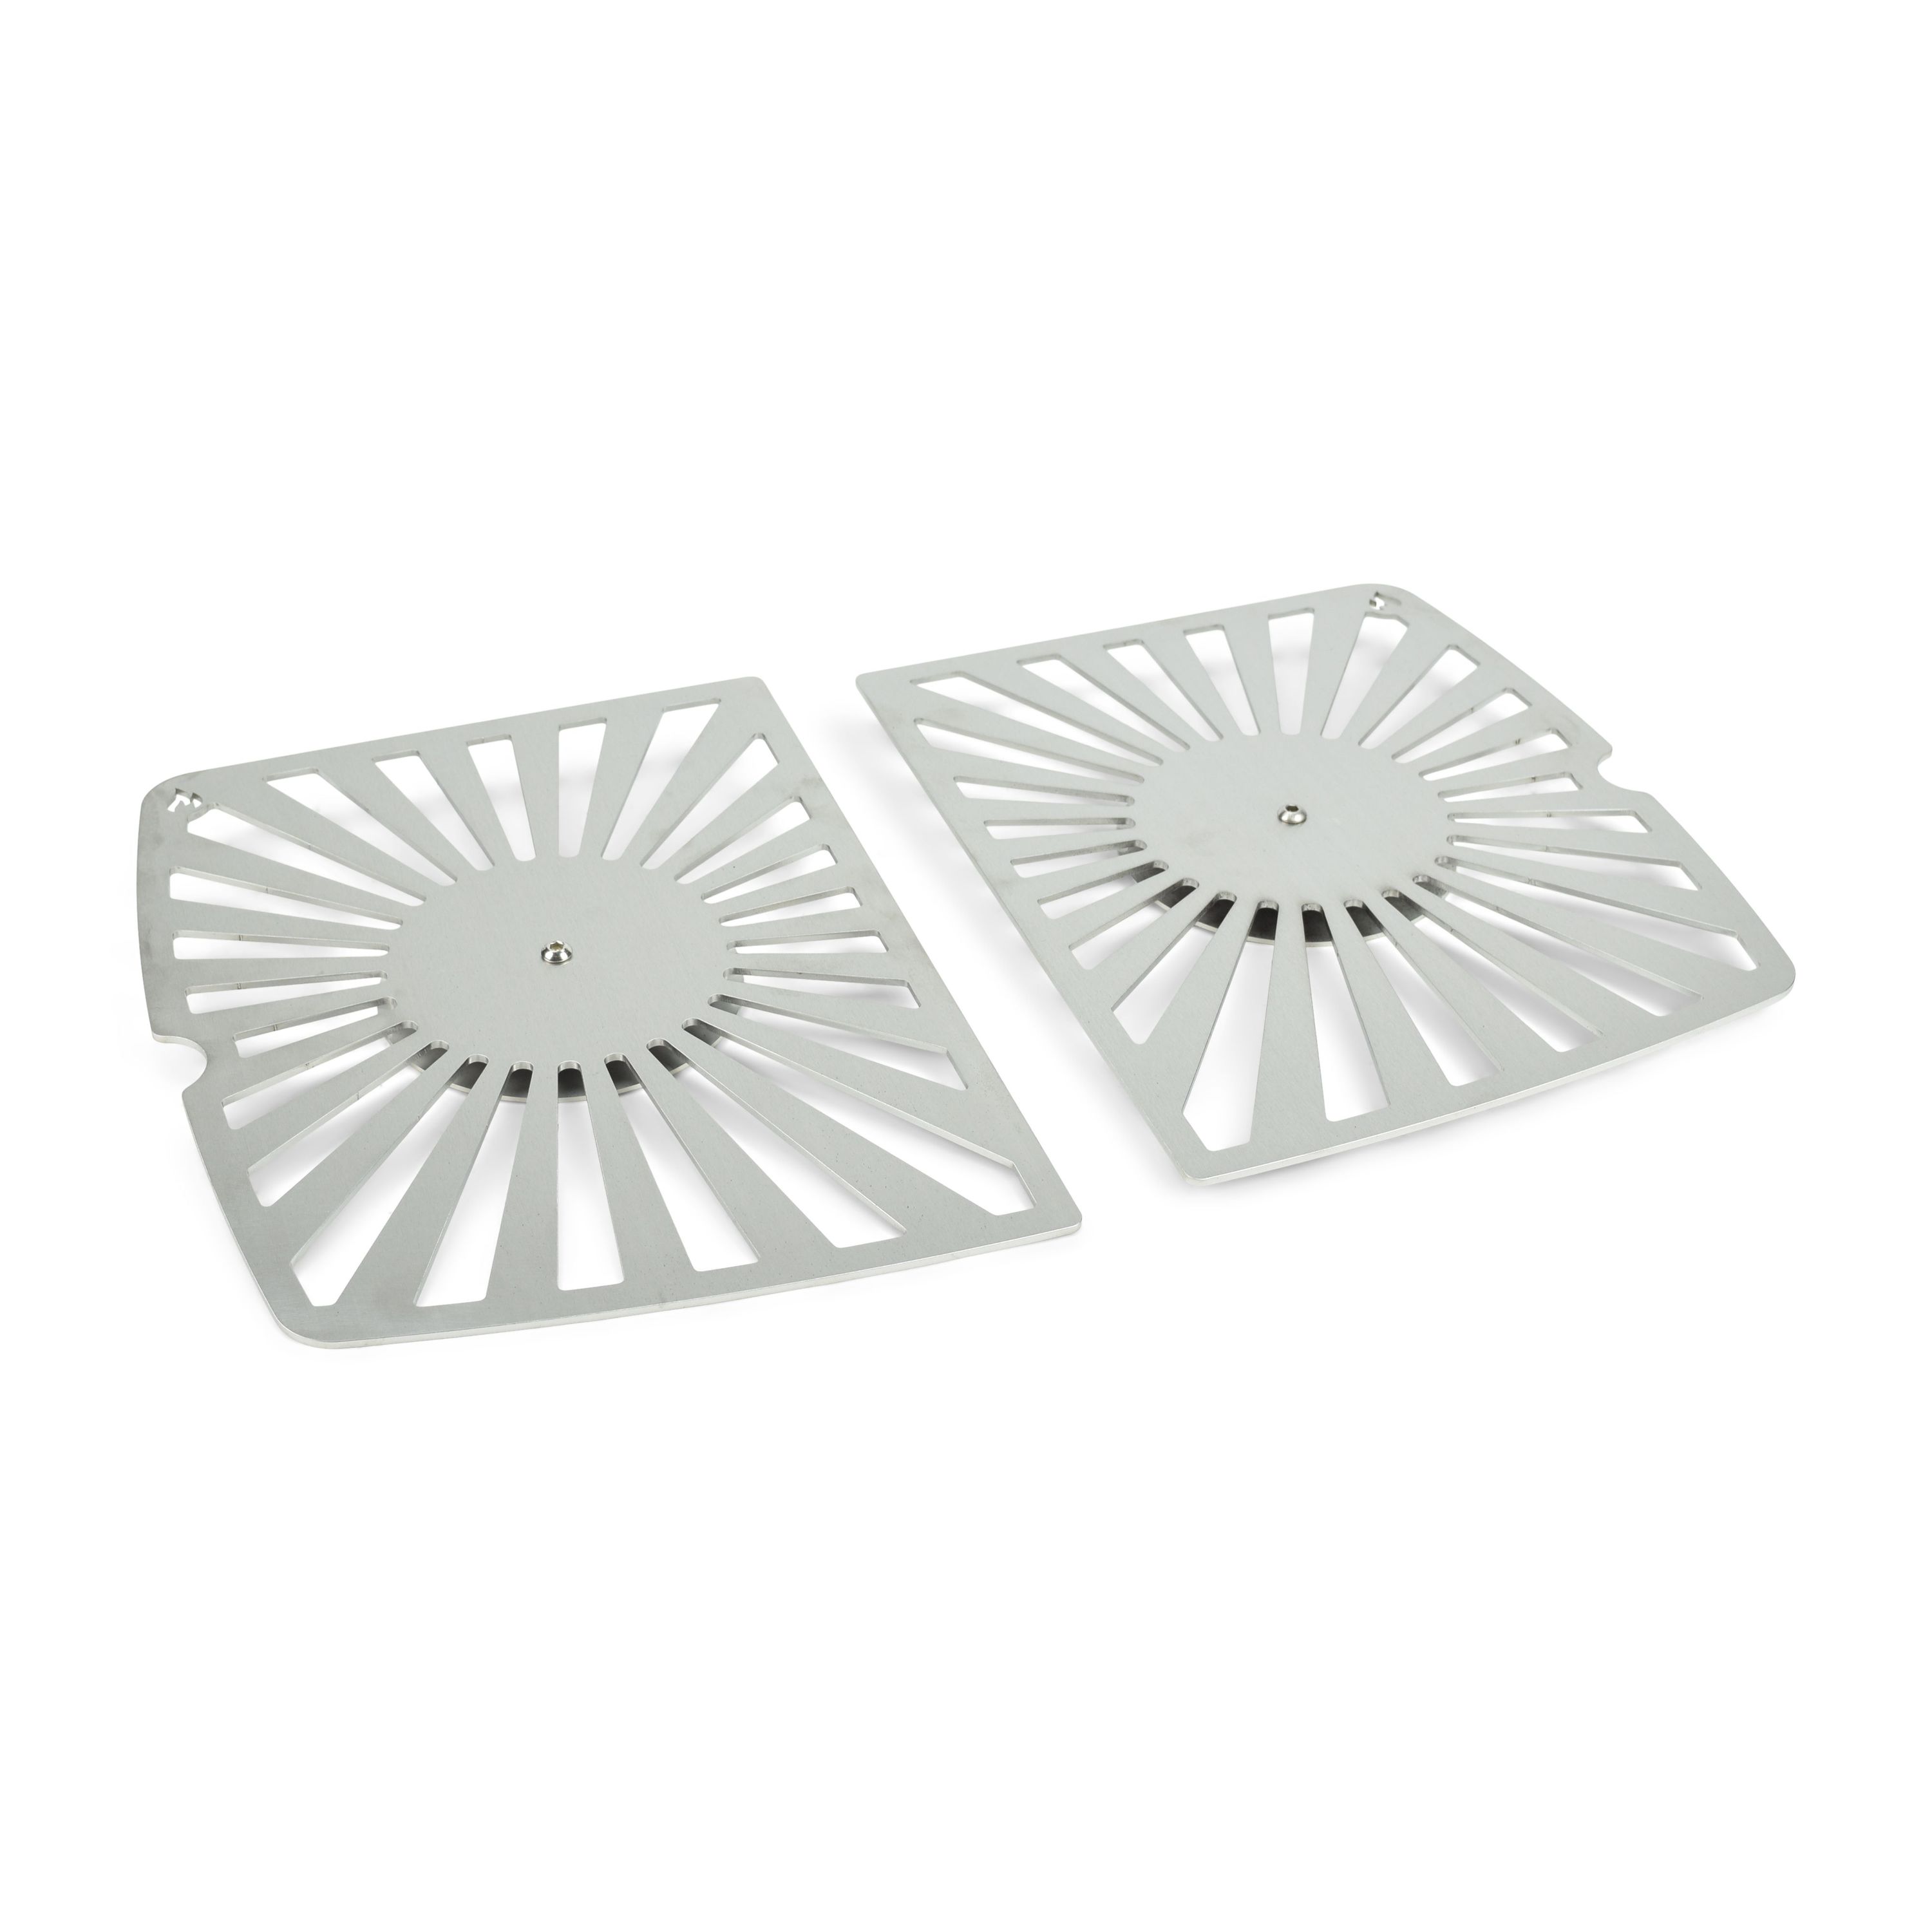 Enders Urban | Explorer Stainless Steel Grill Grates Two-piece with mounted aroma plate